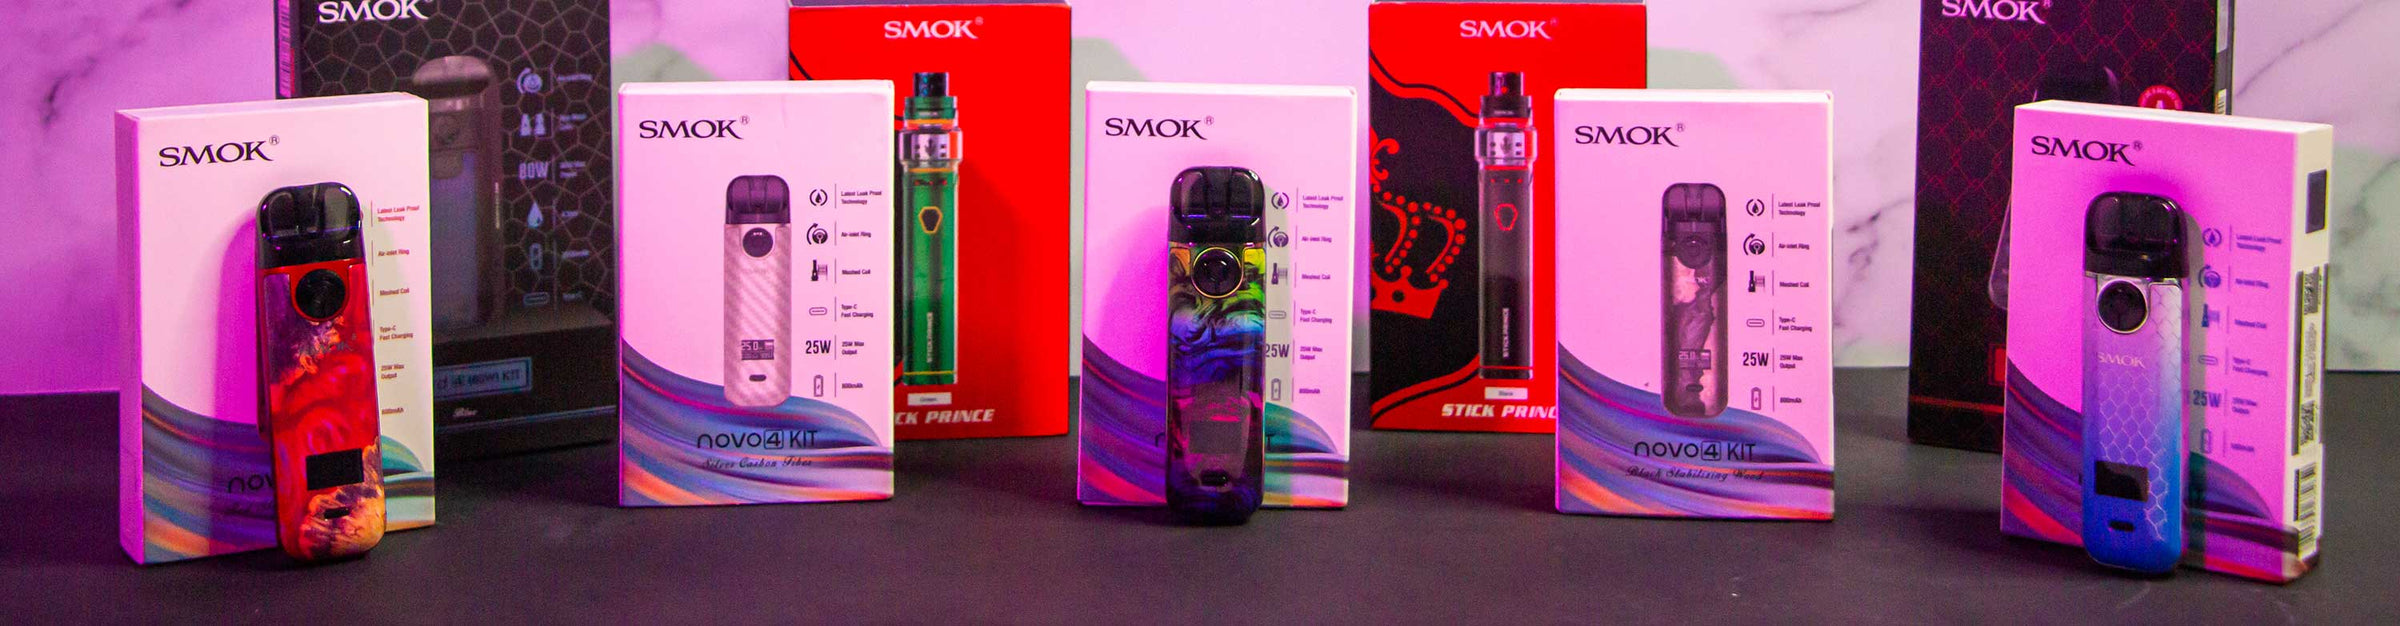 SMOK Pod Vaporizer products standing behind marble studio background using colorful lighting